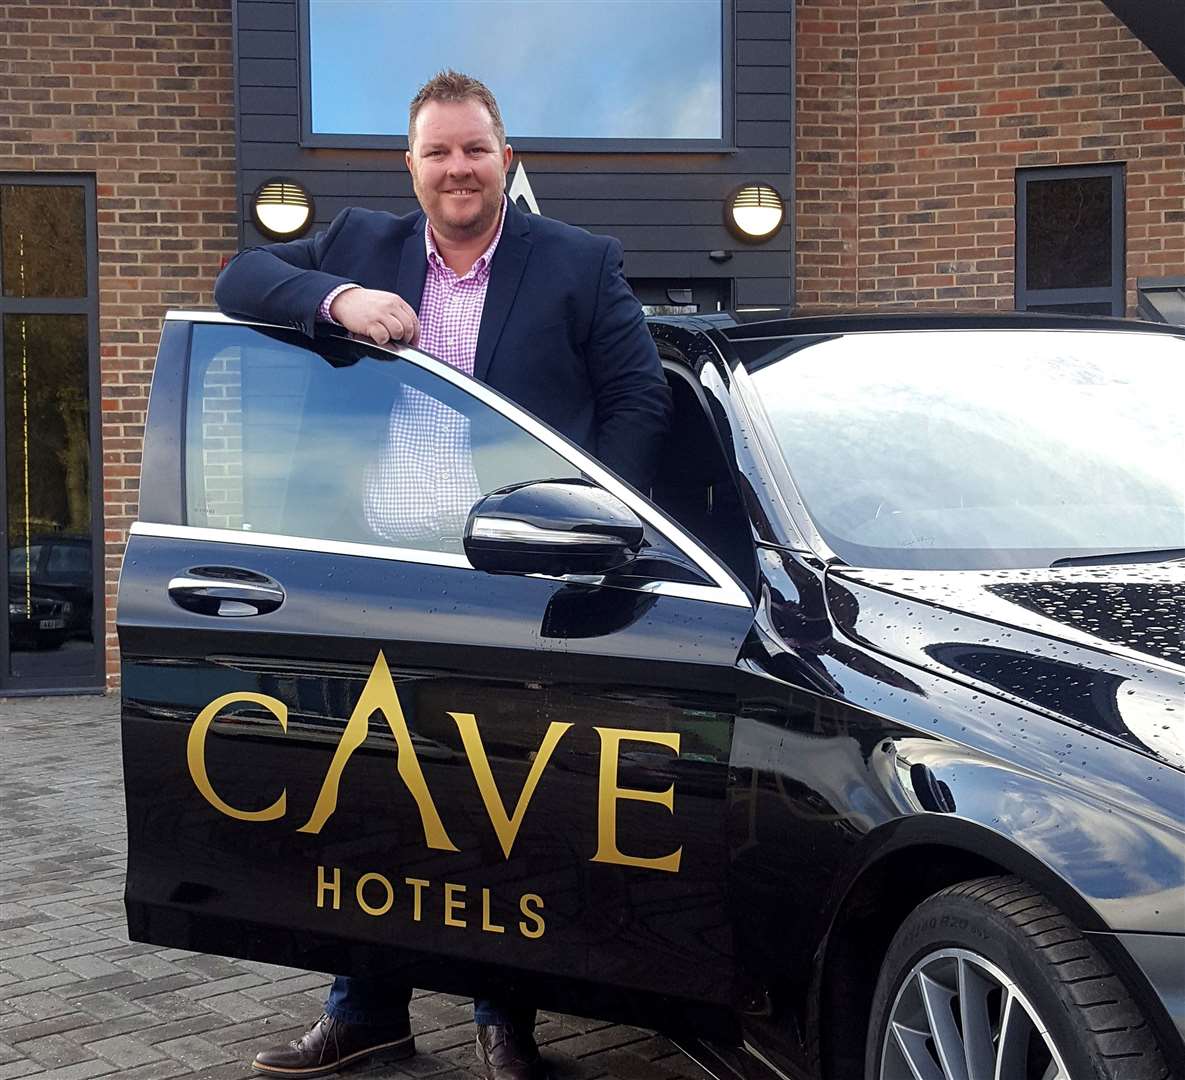 Cave Hotel chief executive and co-owner Johnathan Callister